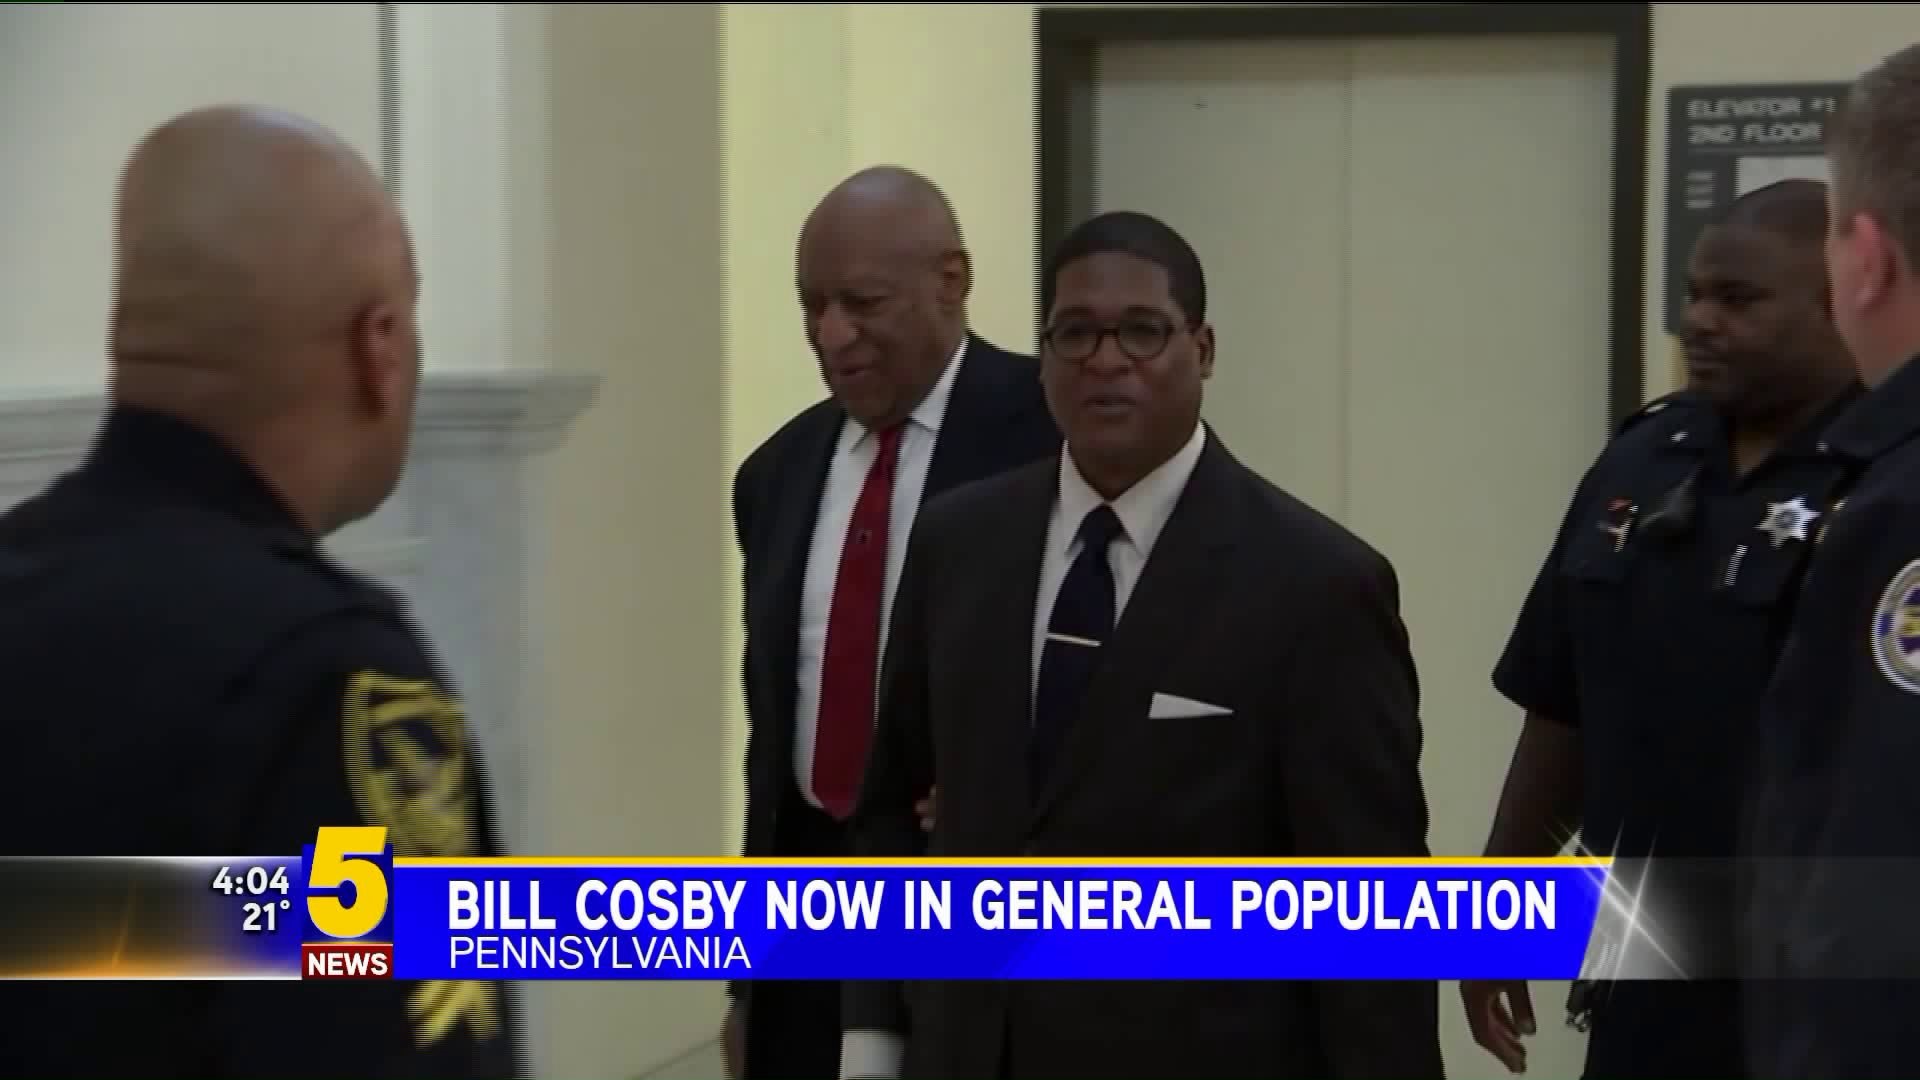 Bill Cosby Now In General Population